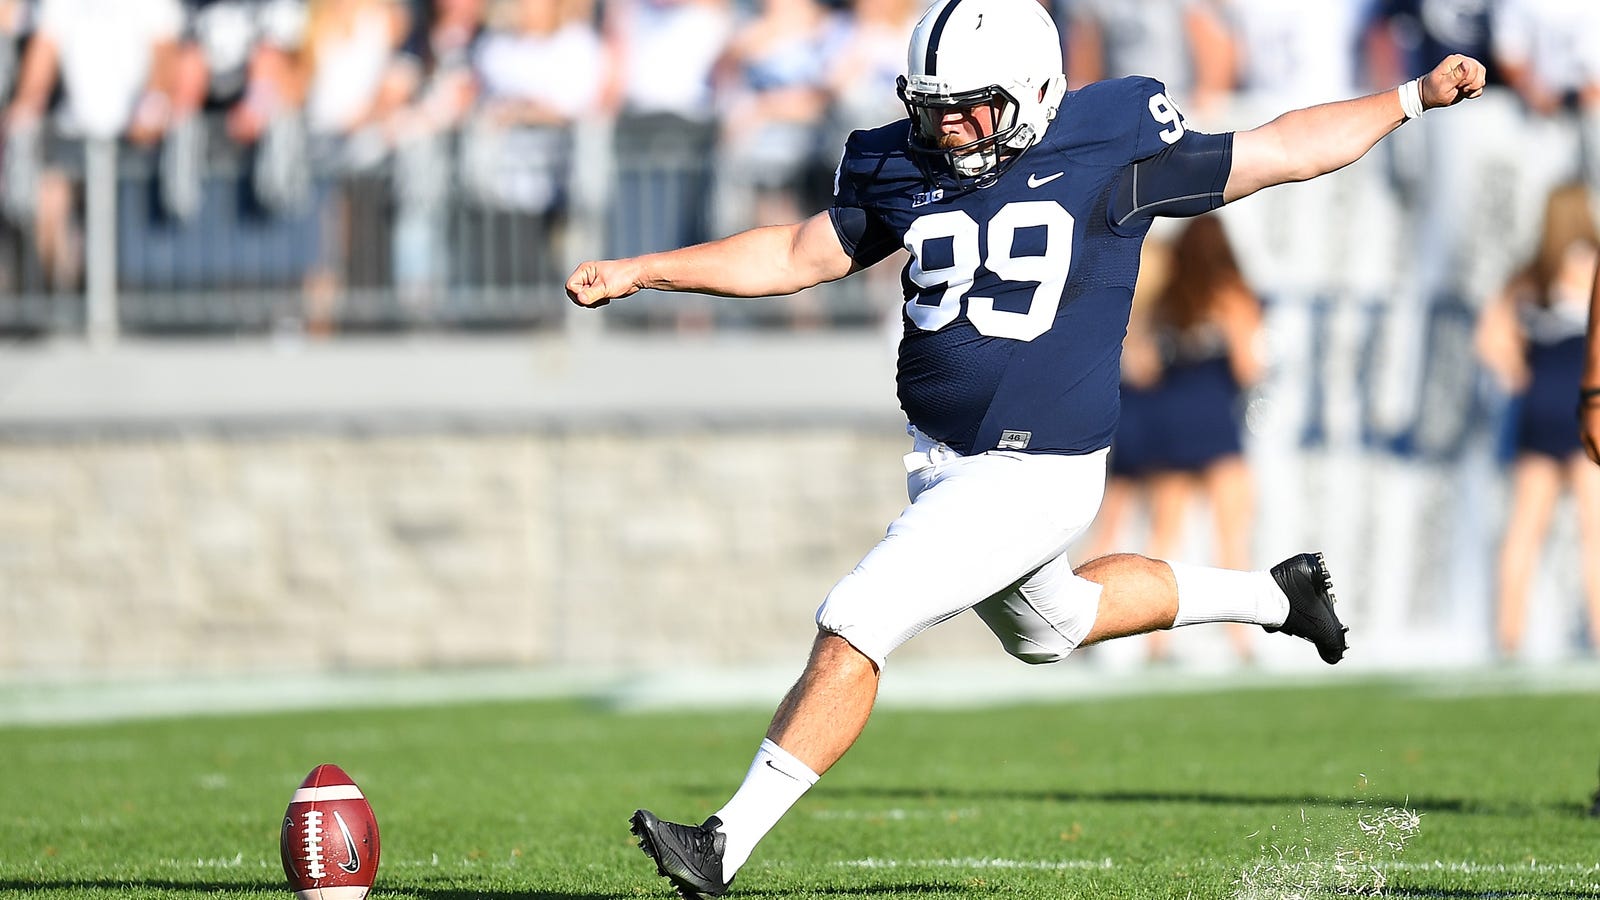 Penn State Kicker Opens Up About Eating Disorder